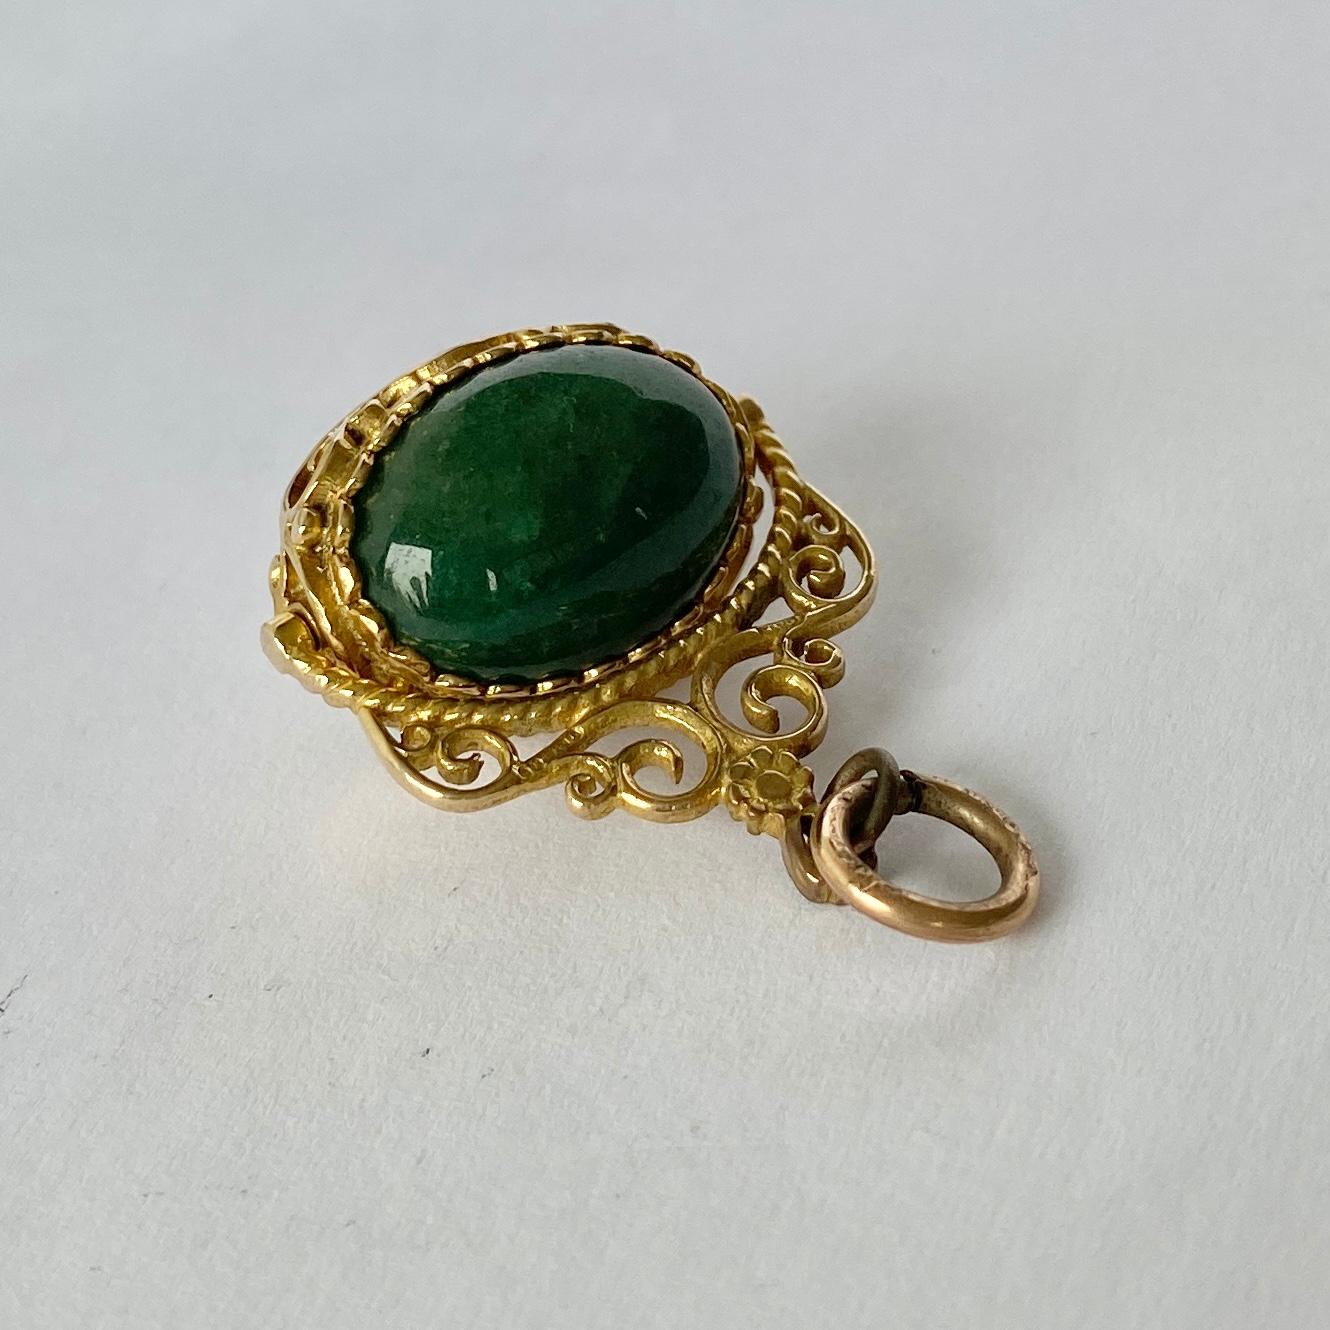 This sweet fob holds a cats eye and jadeite stone that are rounded and smooth. The stones spin and have a decorative frame modelled in 9ct gold. Fully hallmarked 1913 London. 

Fob height inc loop: 31mm

Weight: 10.7g